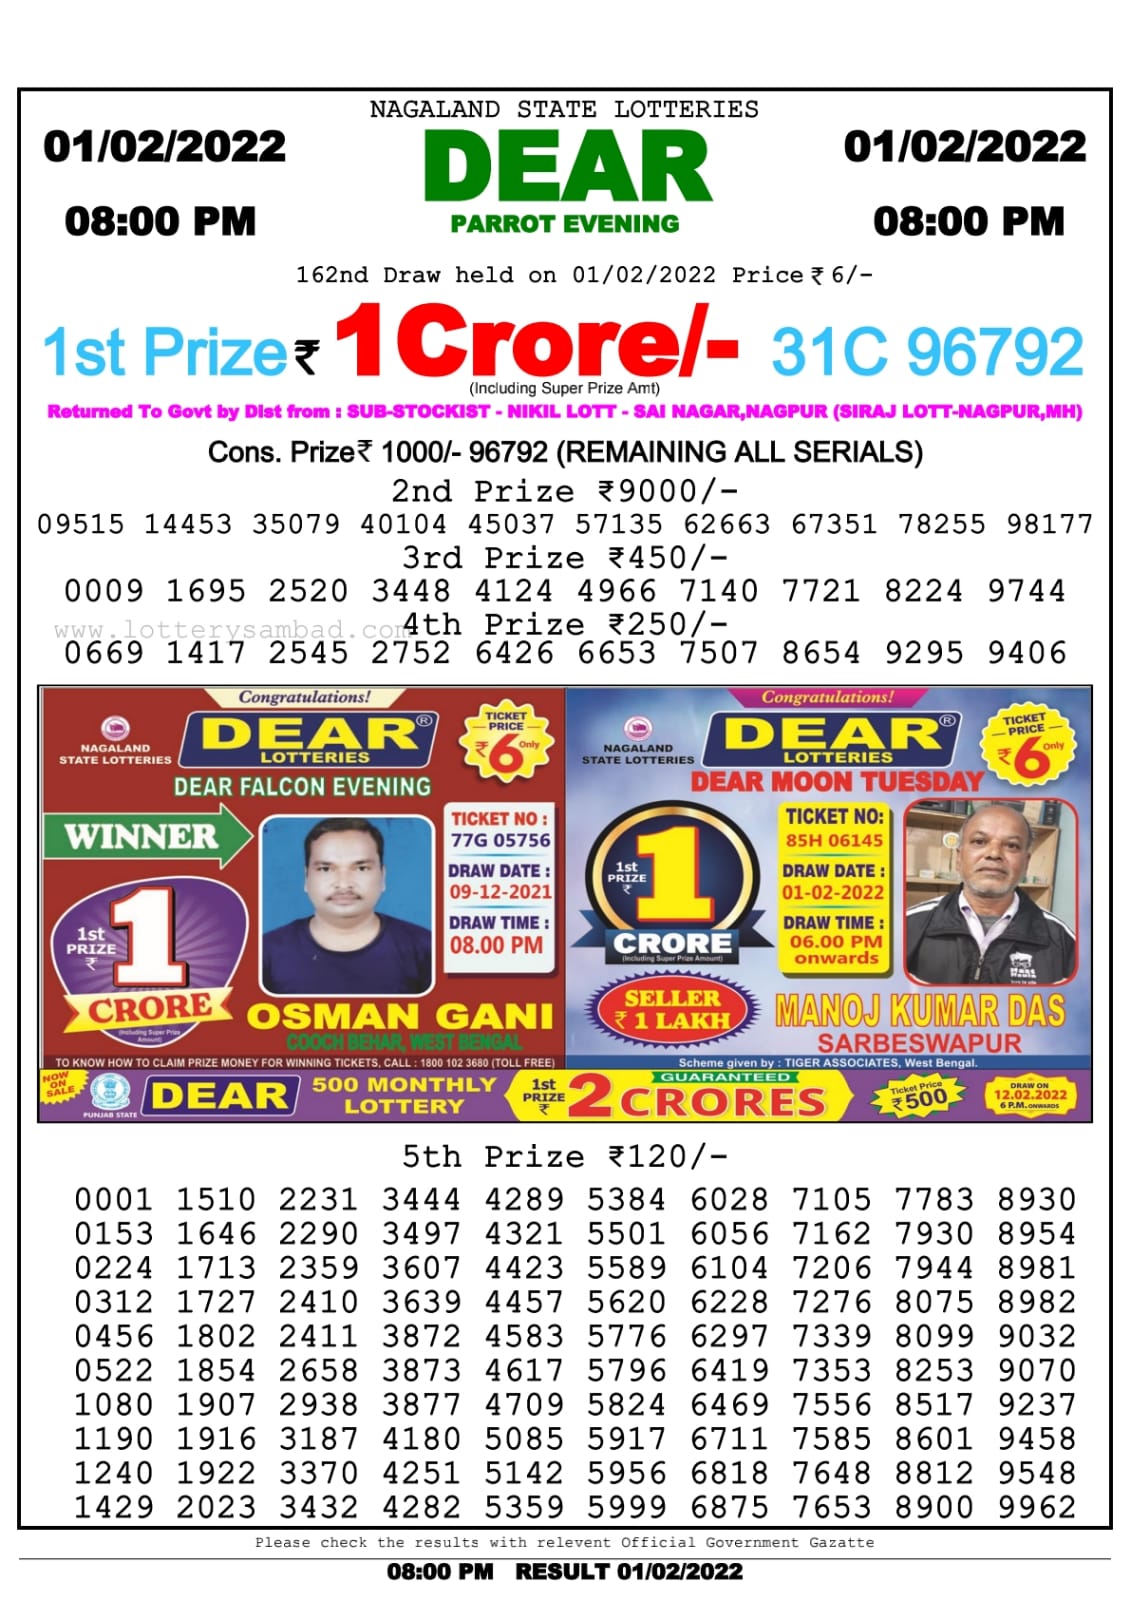 Dear Lottery Nagaland state Lottery Results 8.00 PM 01.02.2022